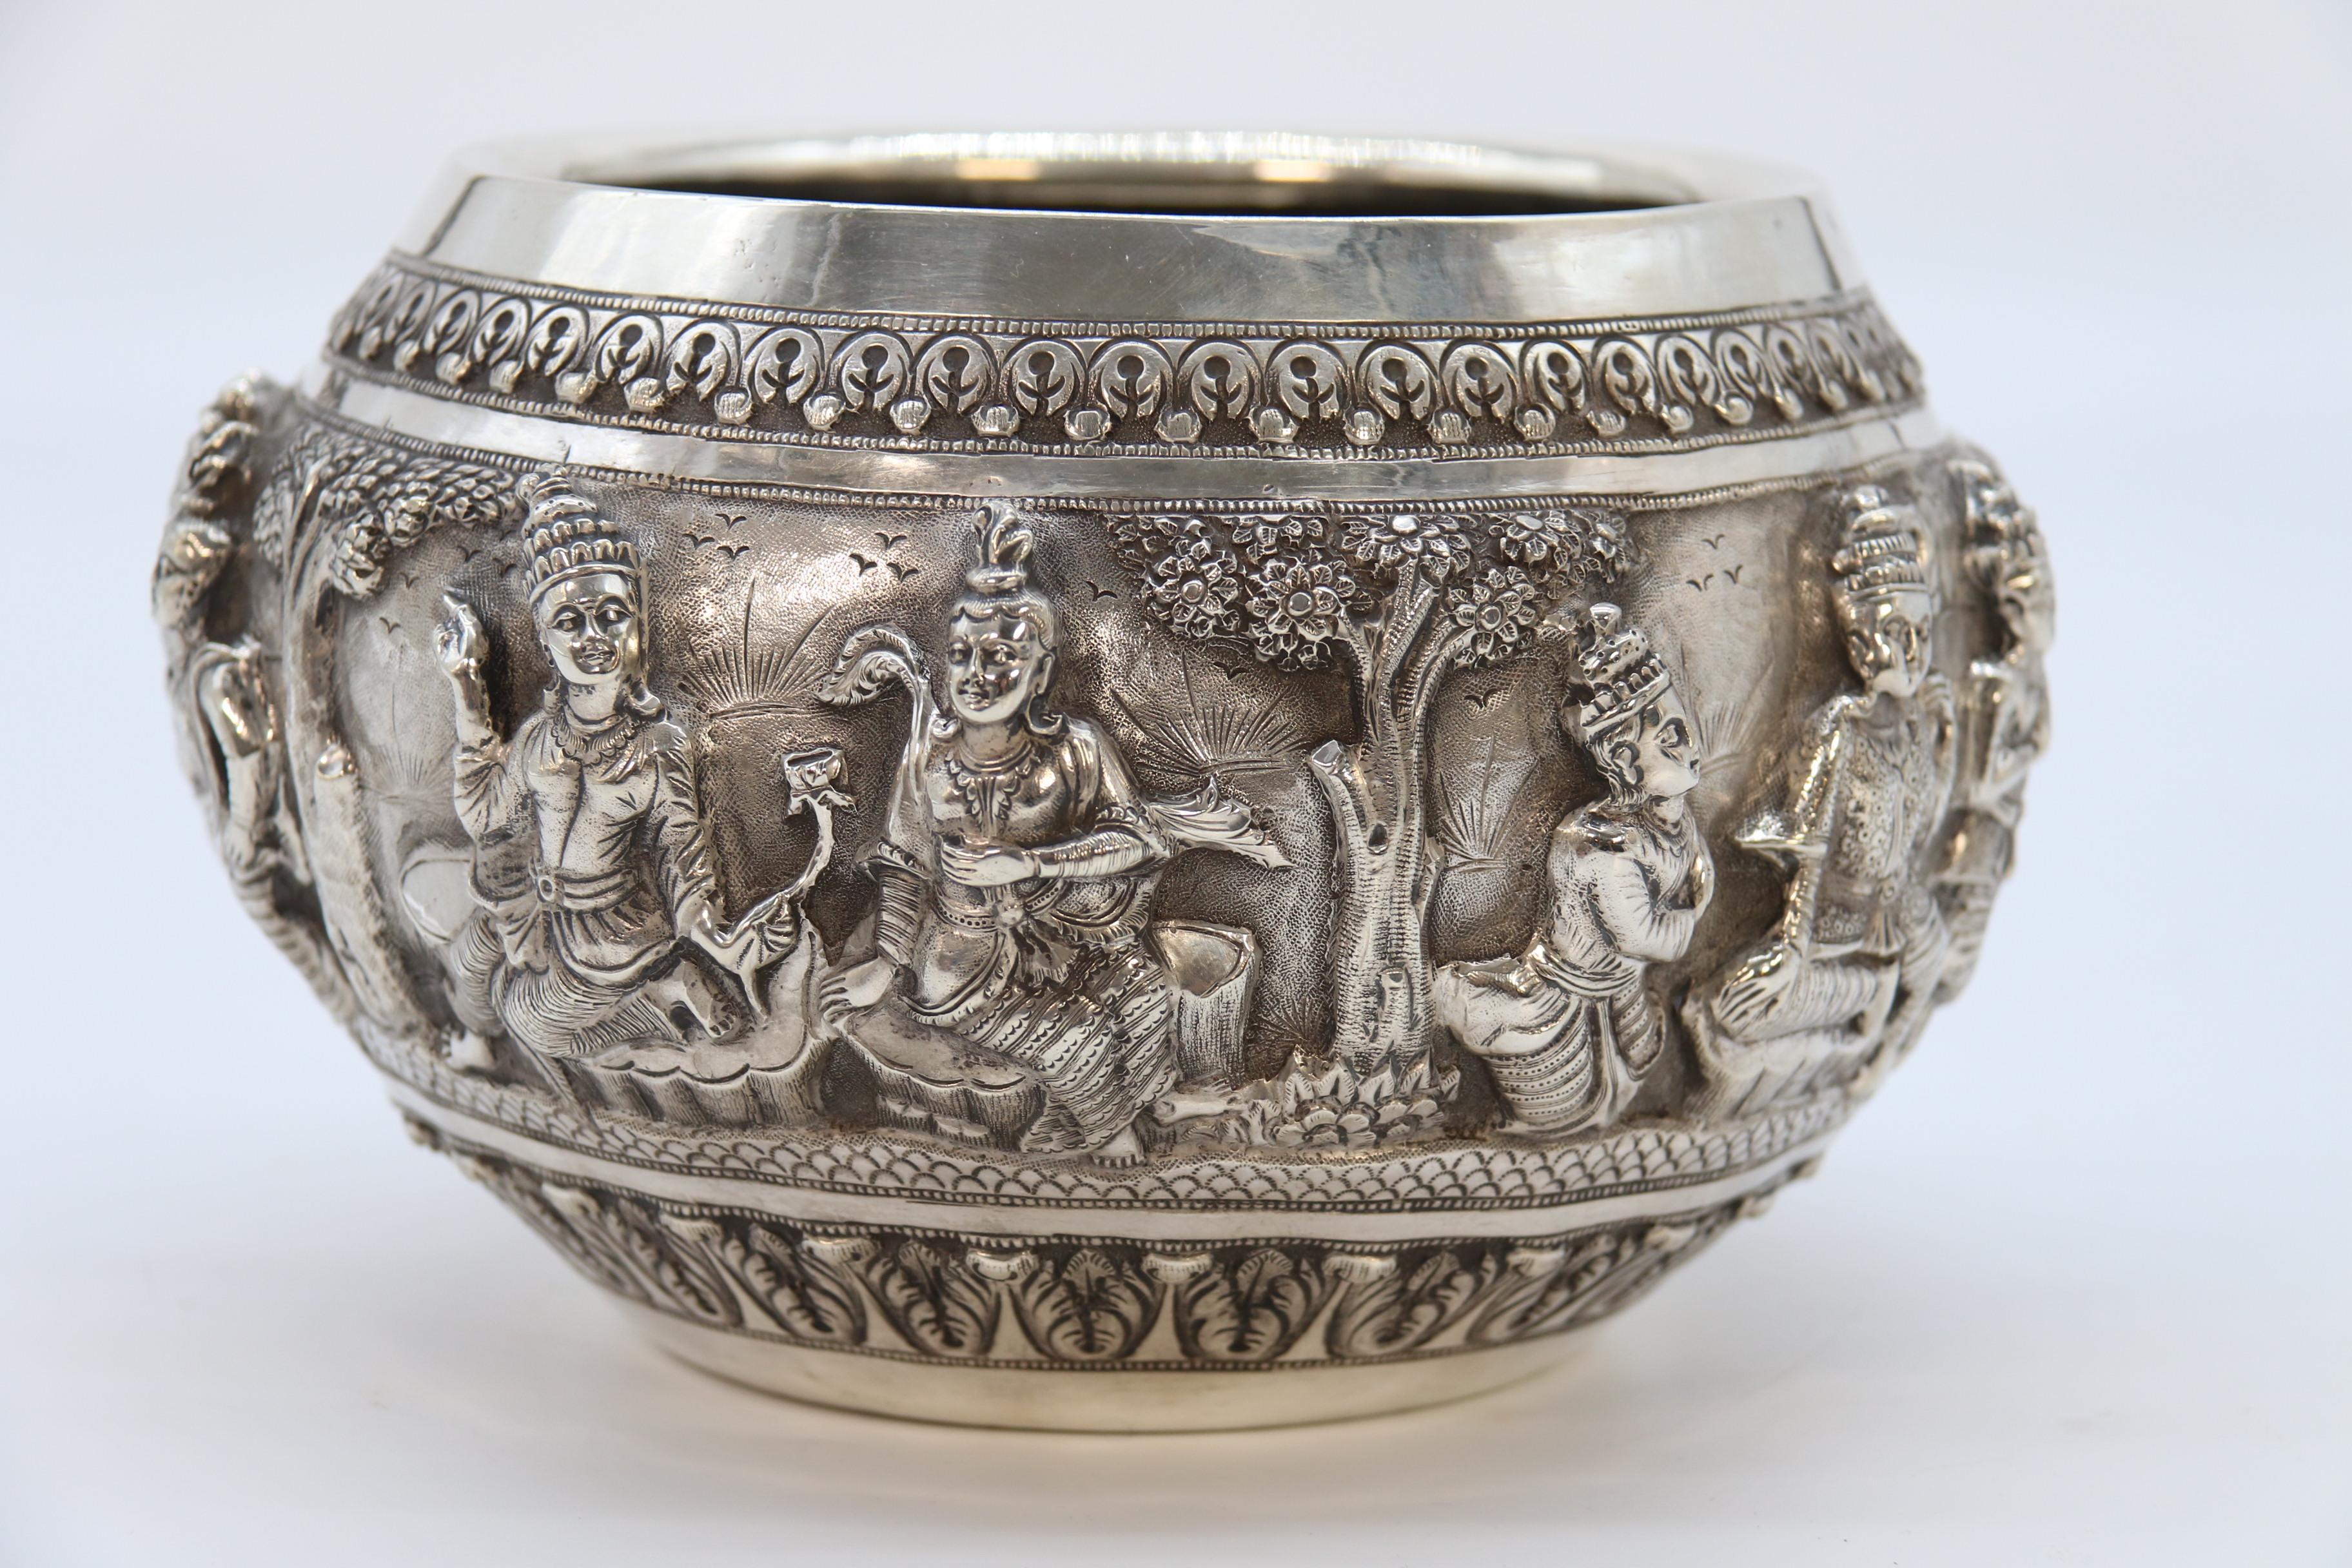 19th century Indian silver Raj period deep relief repousse work bowl circa 1870 For Sale 3